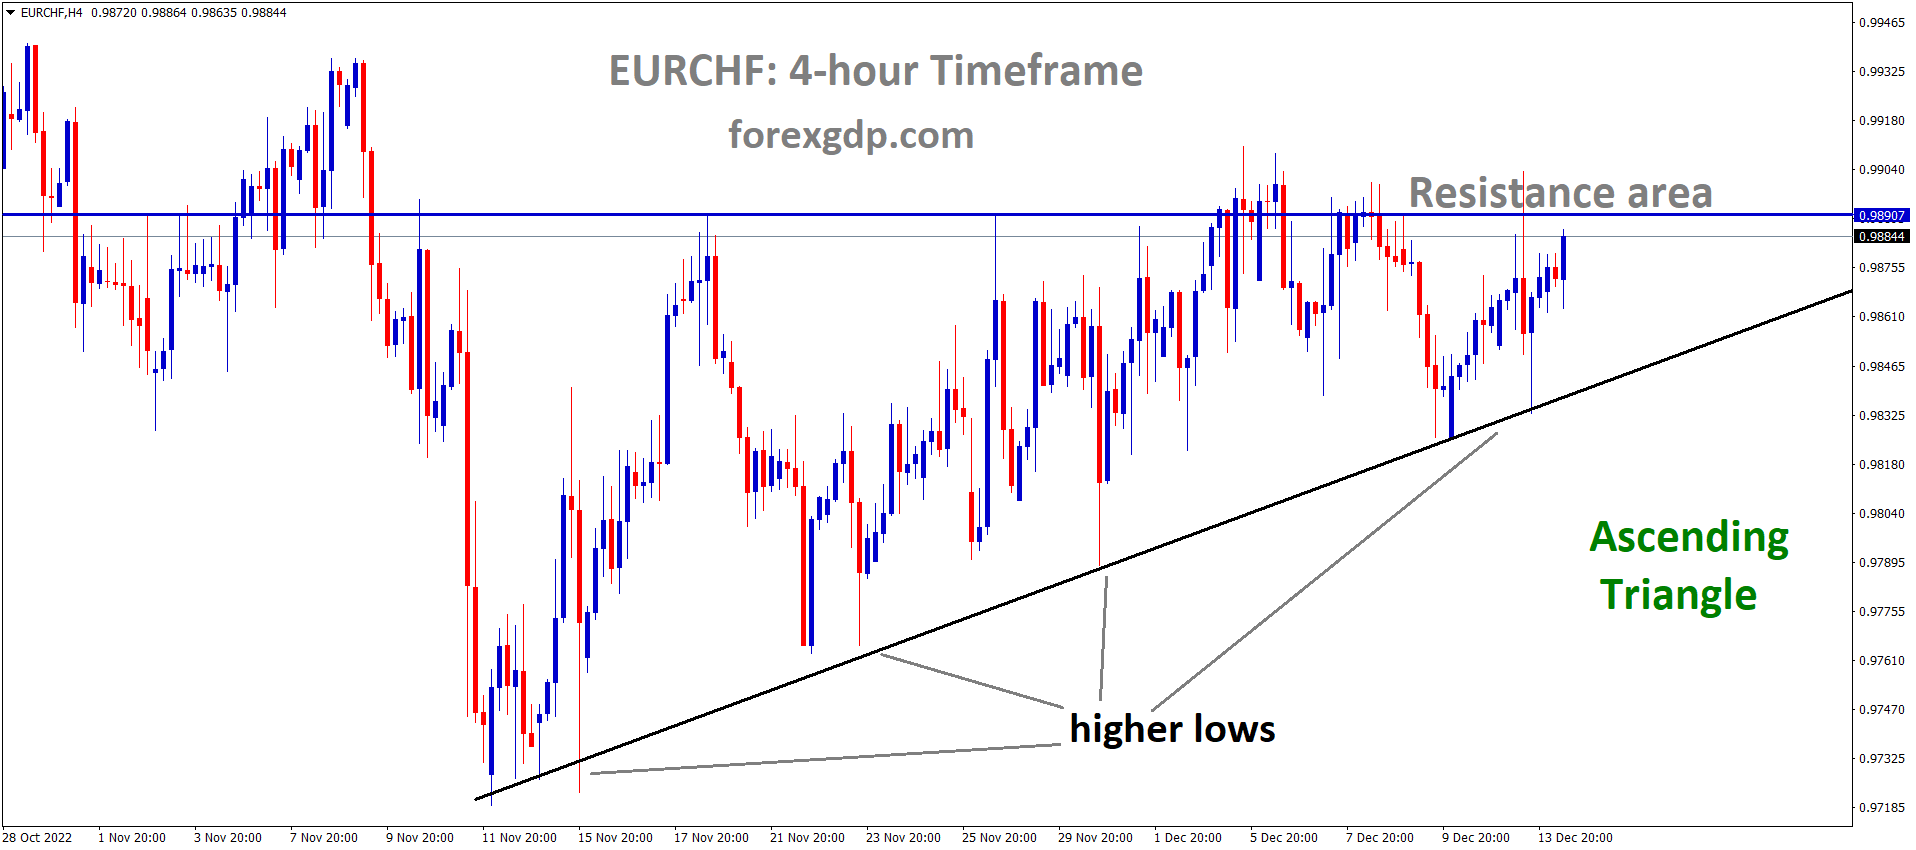 EURCHF is moving in an Ascending triangle pattern and the market has reached the horizontal resistance area of the pattern